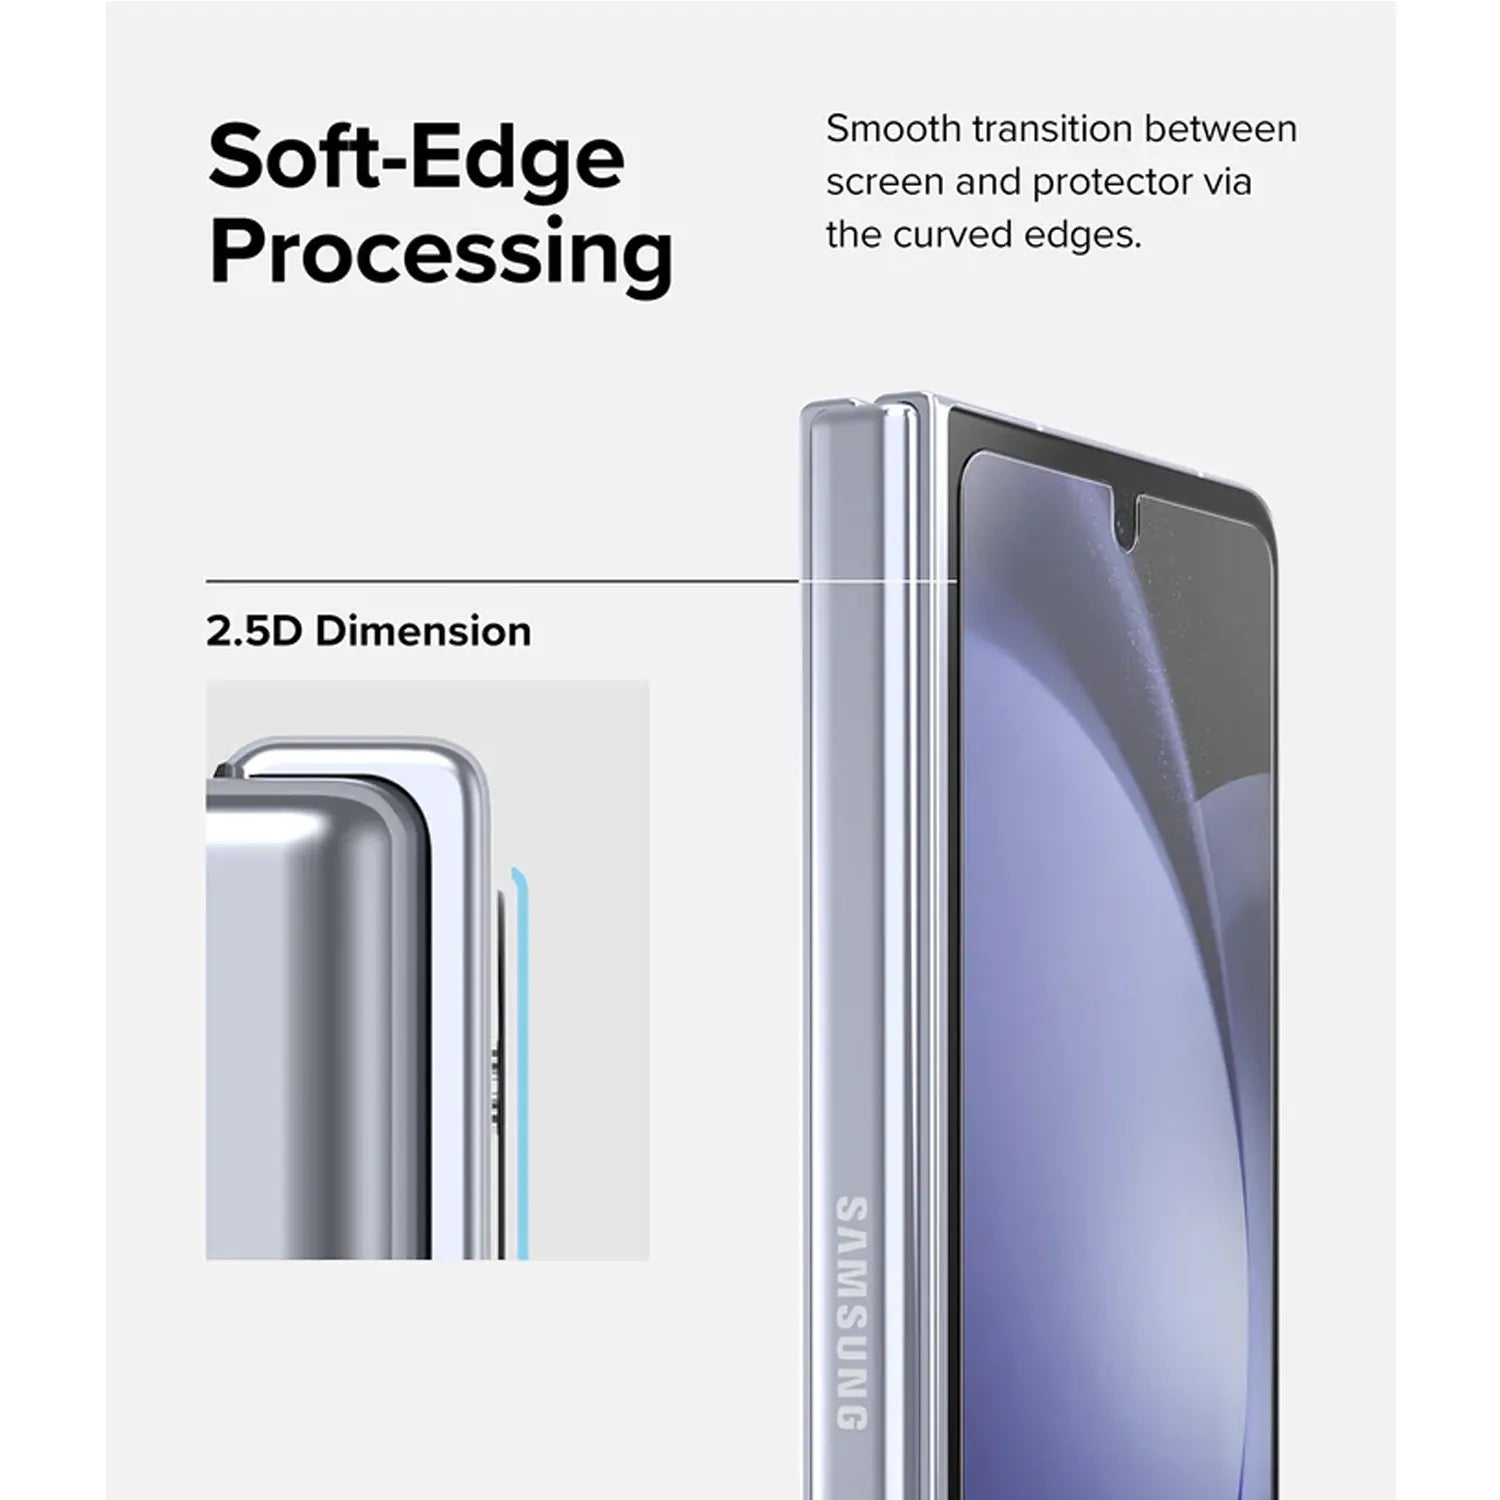 Ringke Cover Display Glass Screen Protector for Samsung Galaxy Z Fold 5 Exterior Cover Display Tempered Glass, Clear